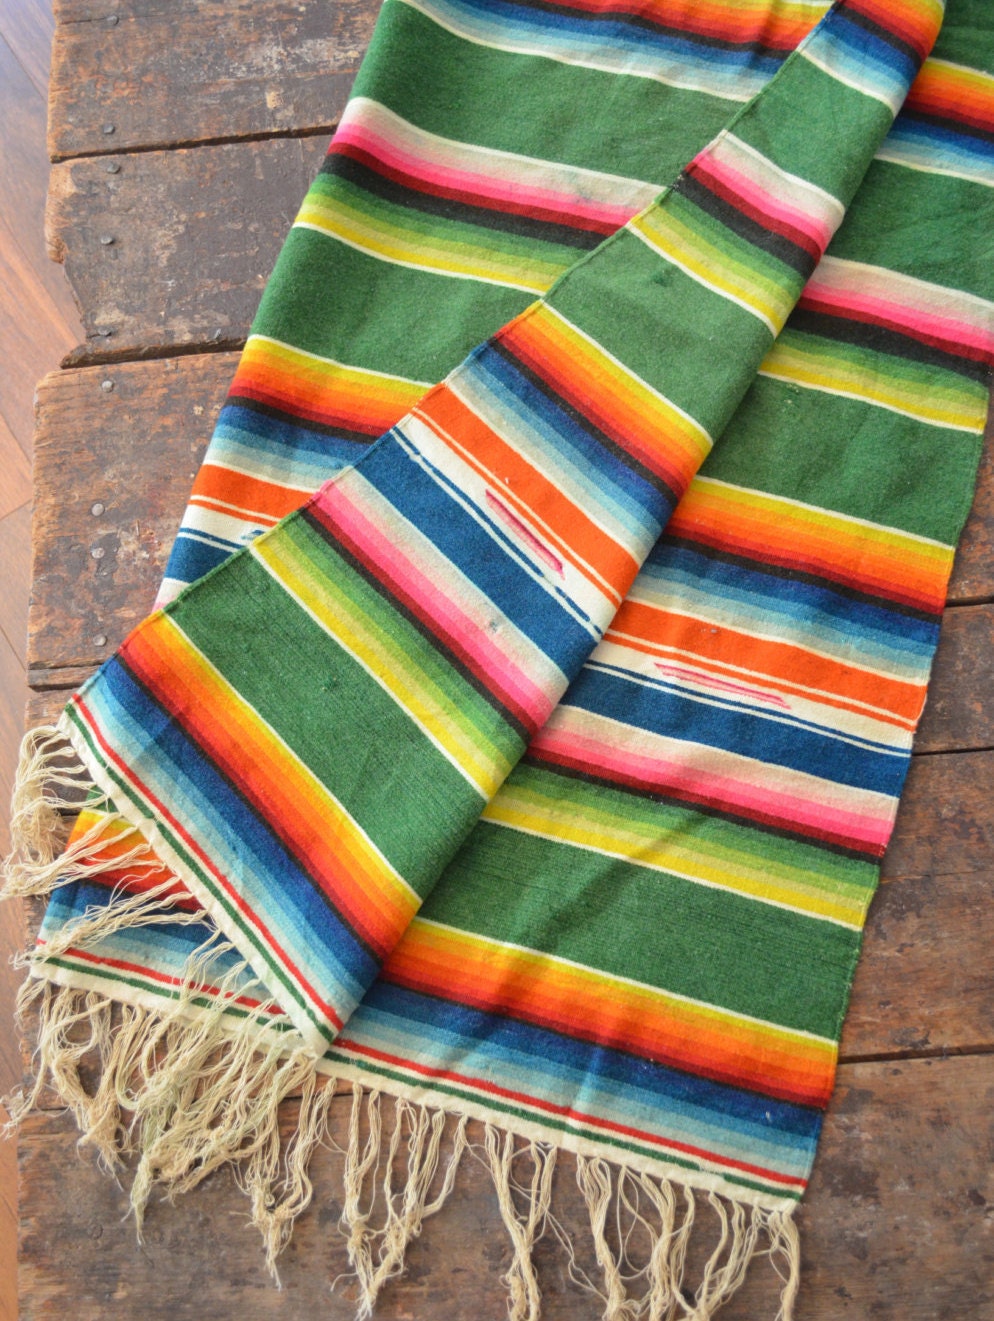 Mexican Blankets - Mexican Party Supplies at Amols' Fiesta